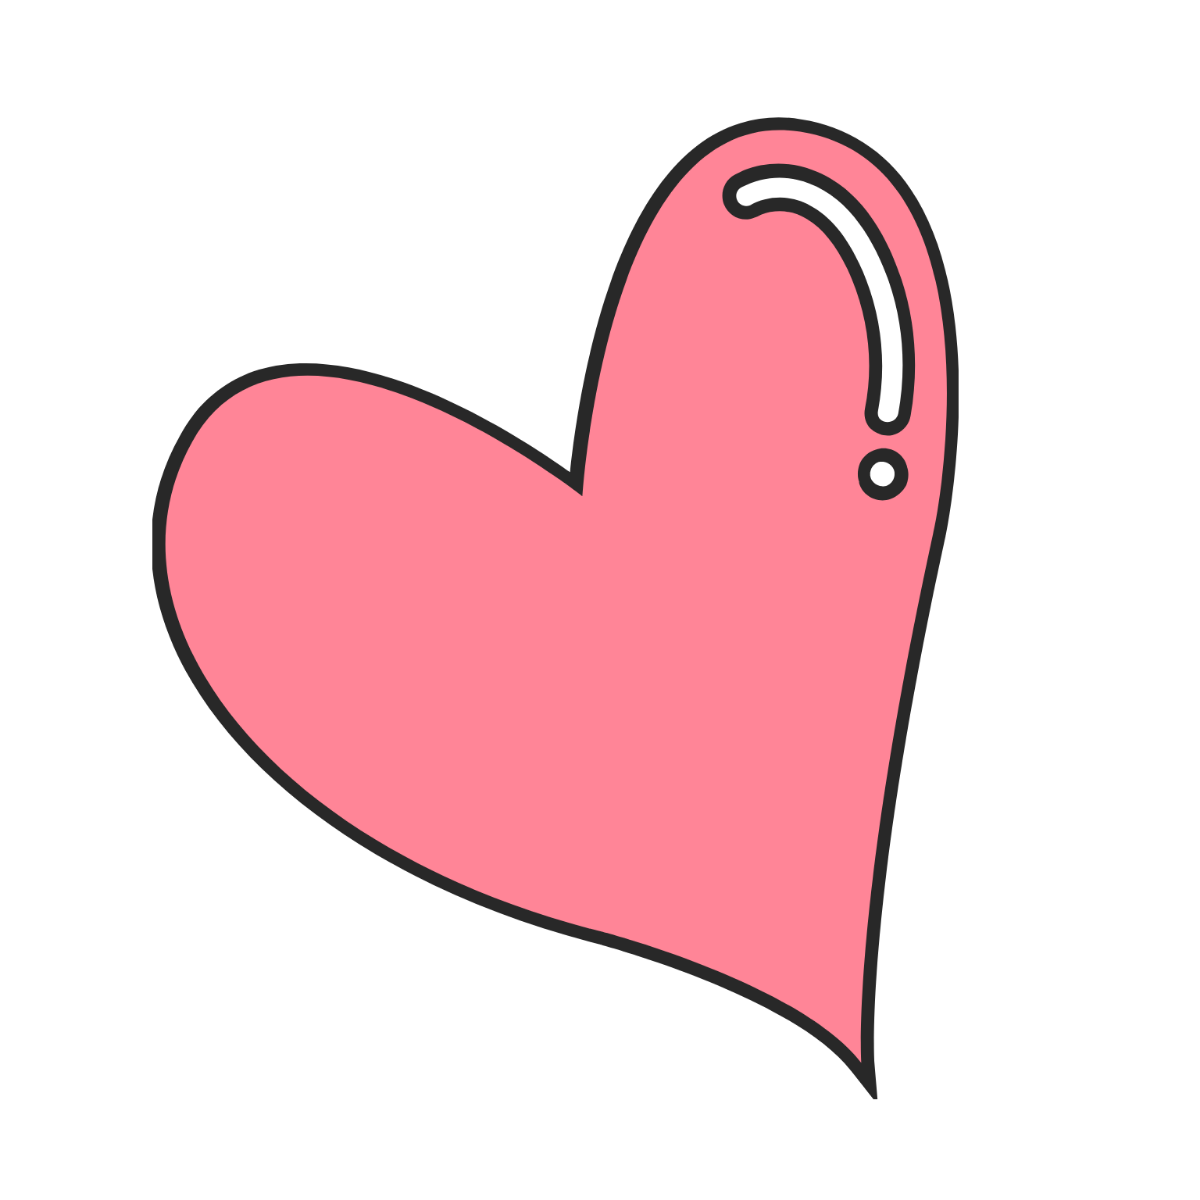 Heart Clipart Image